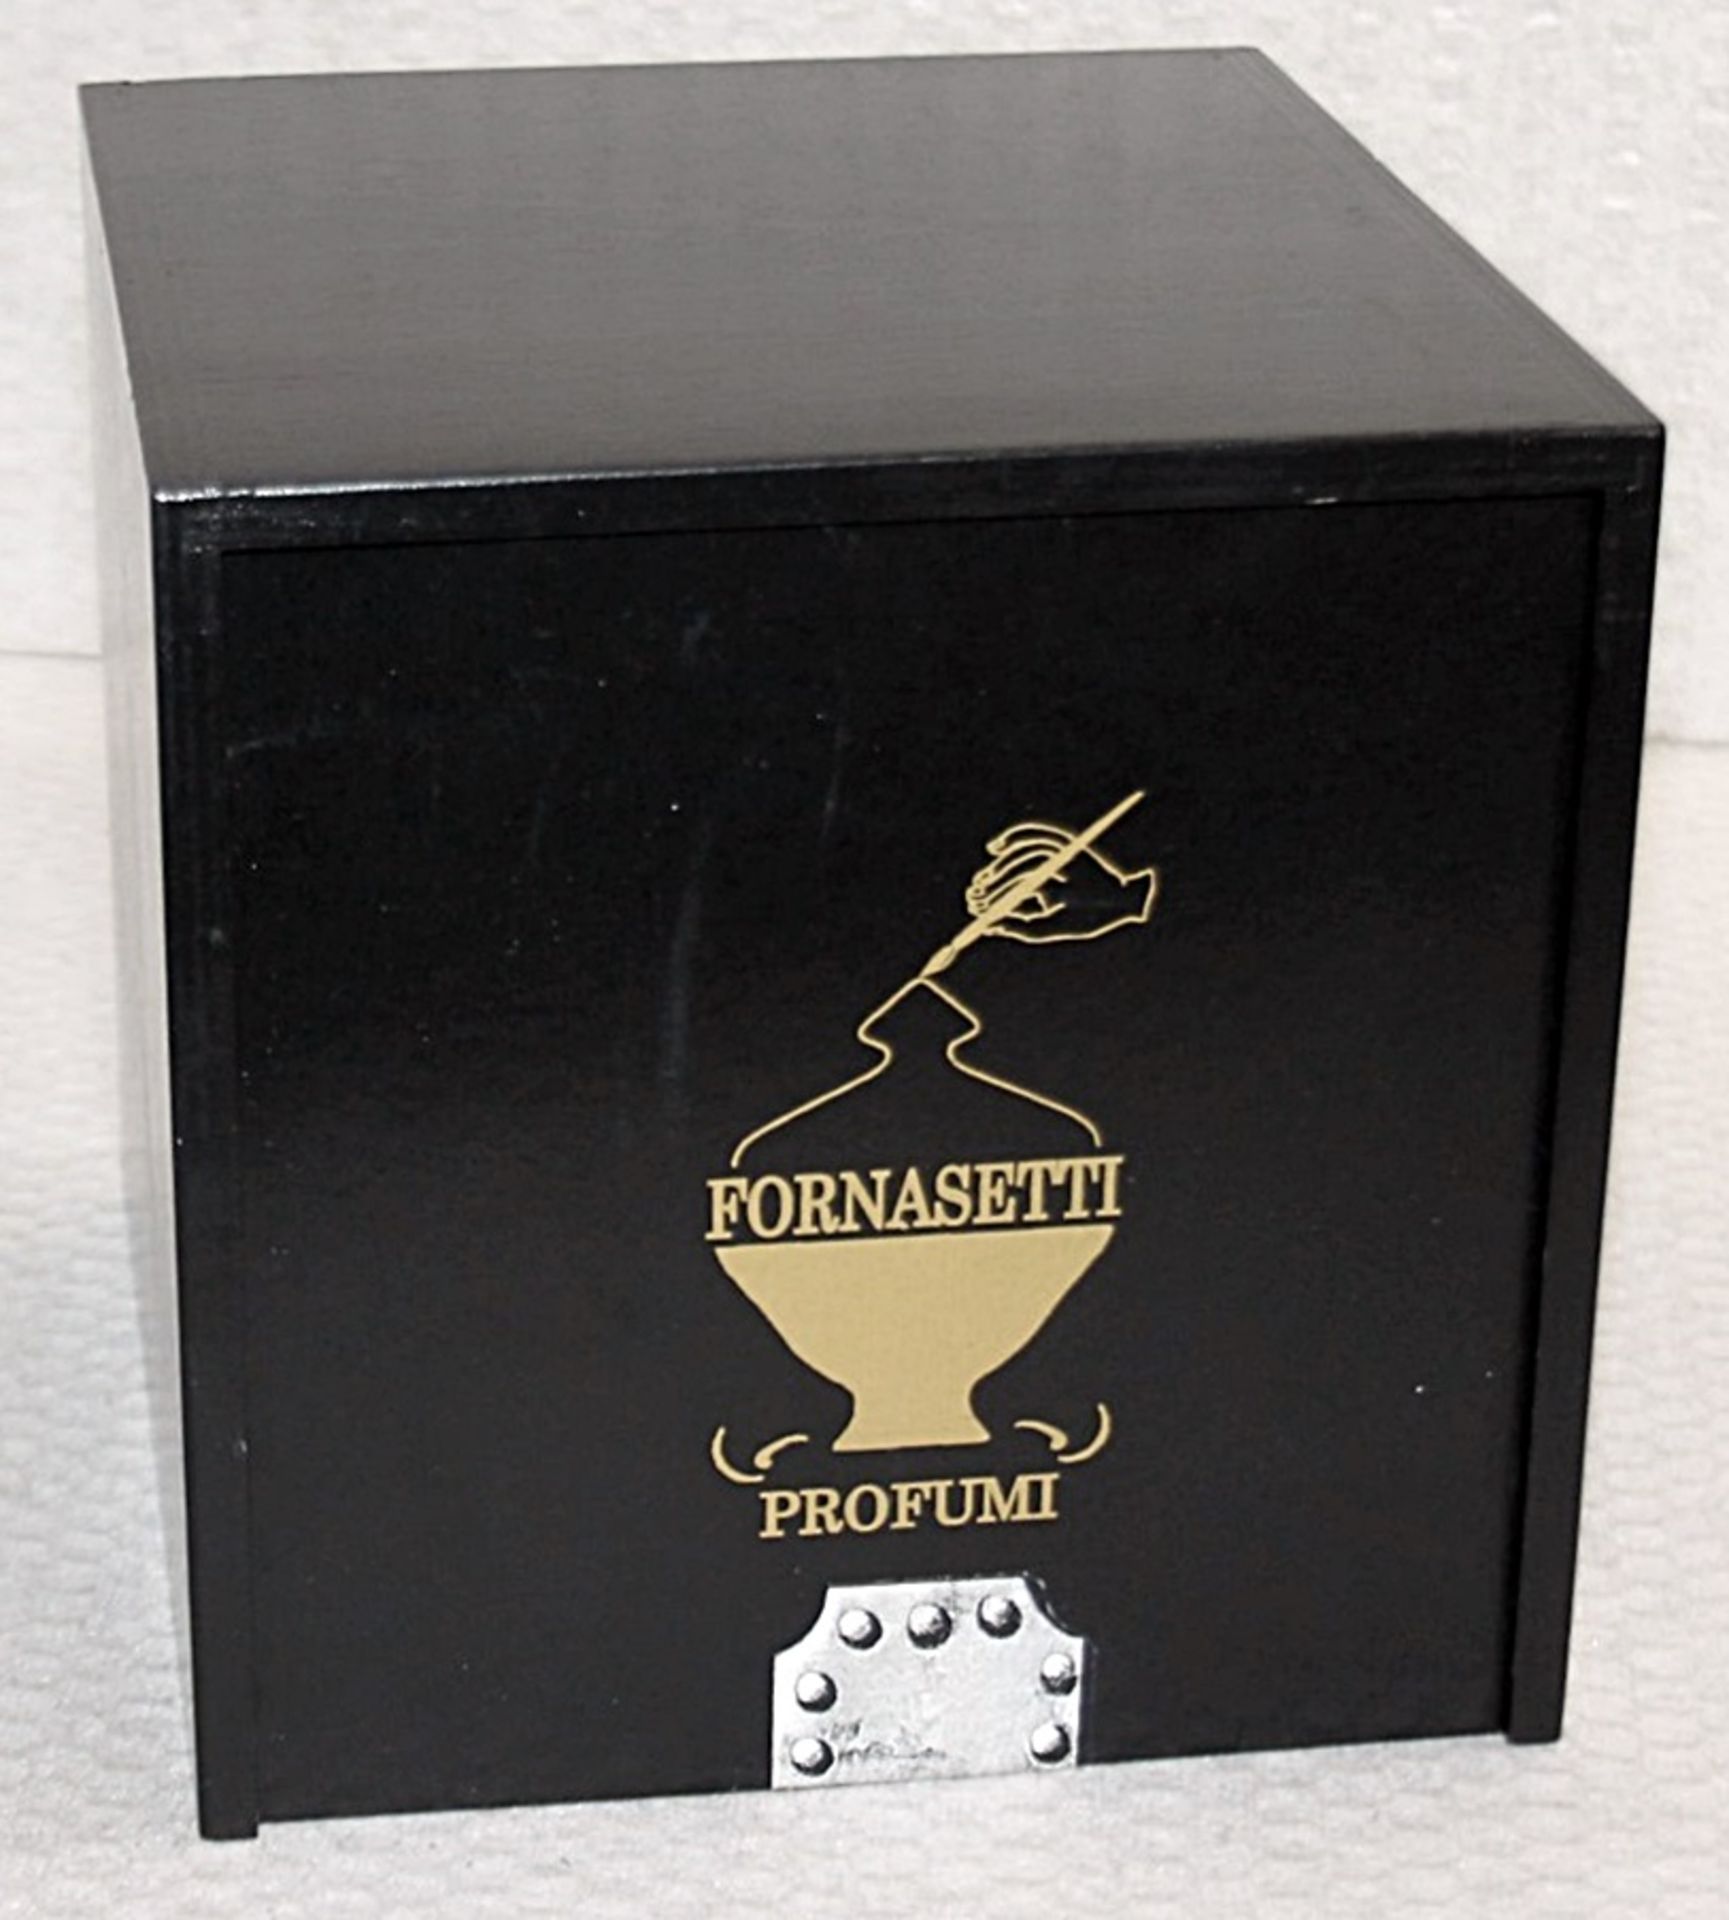 1 x FORNASETTI PROFUMI 'Scimmie' Large 1.9kg Luxury Scented Candle - Original Price £495.00 - Boxed - Image 9 of 9